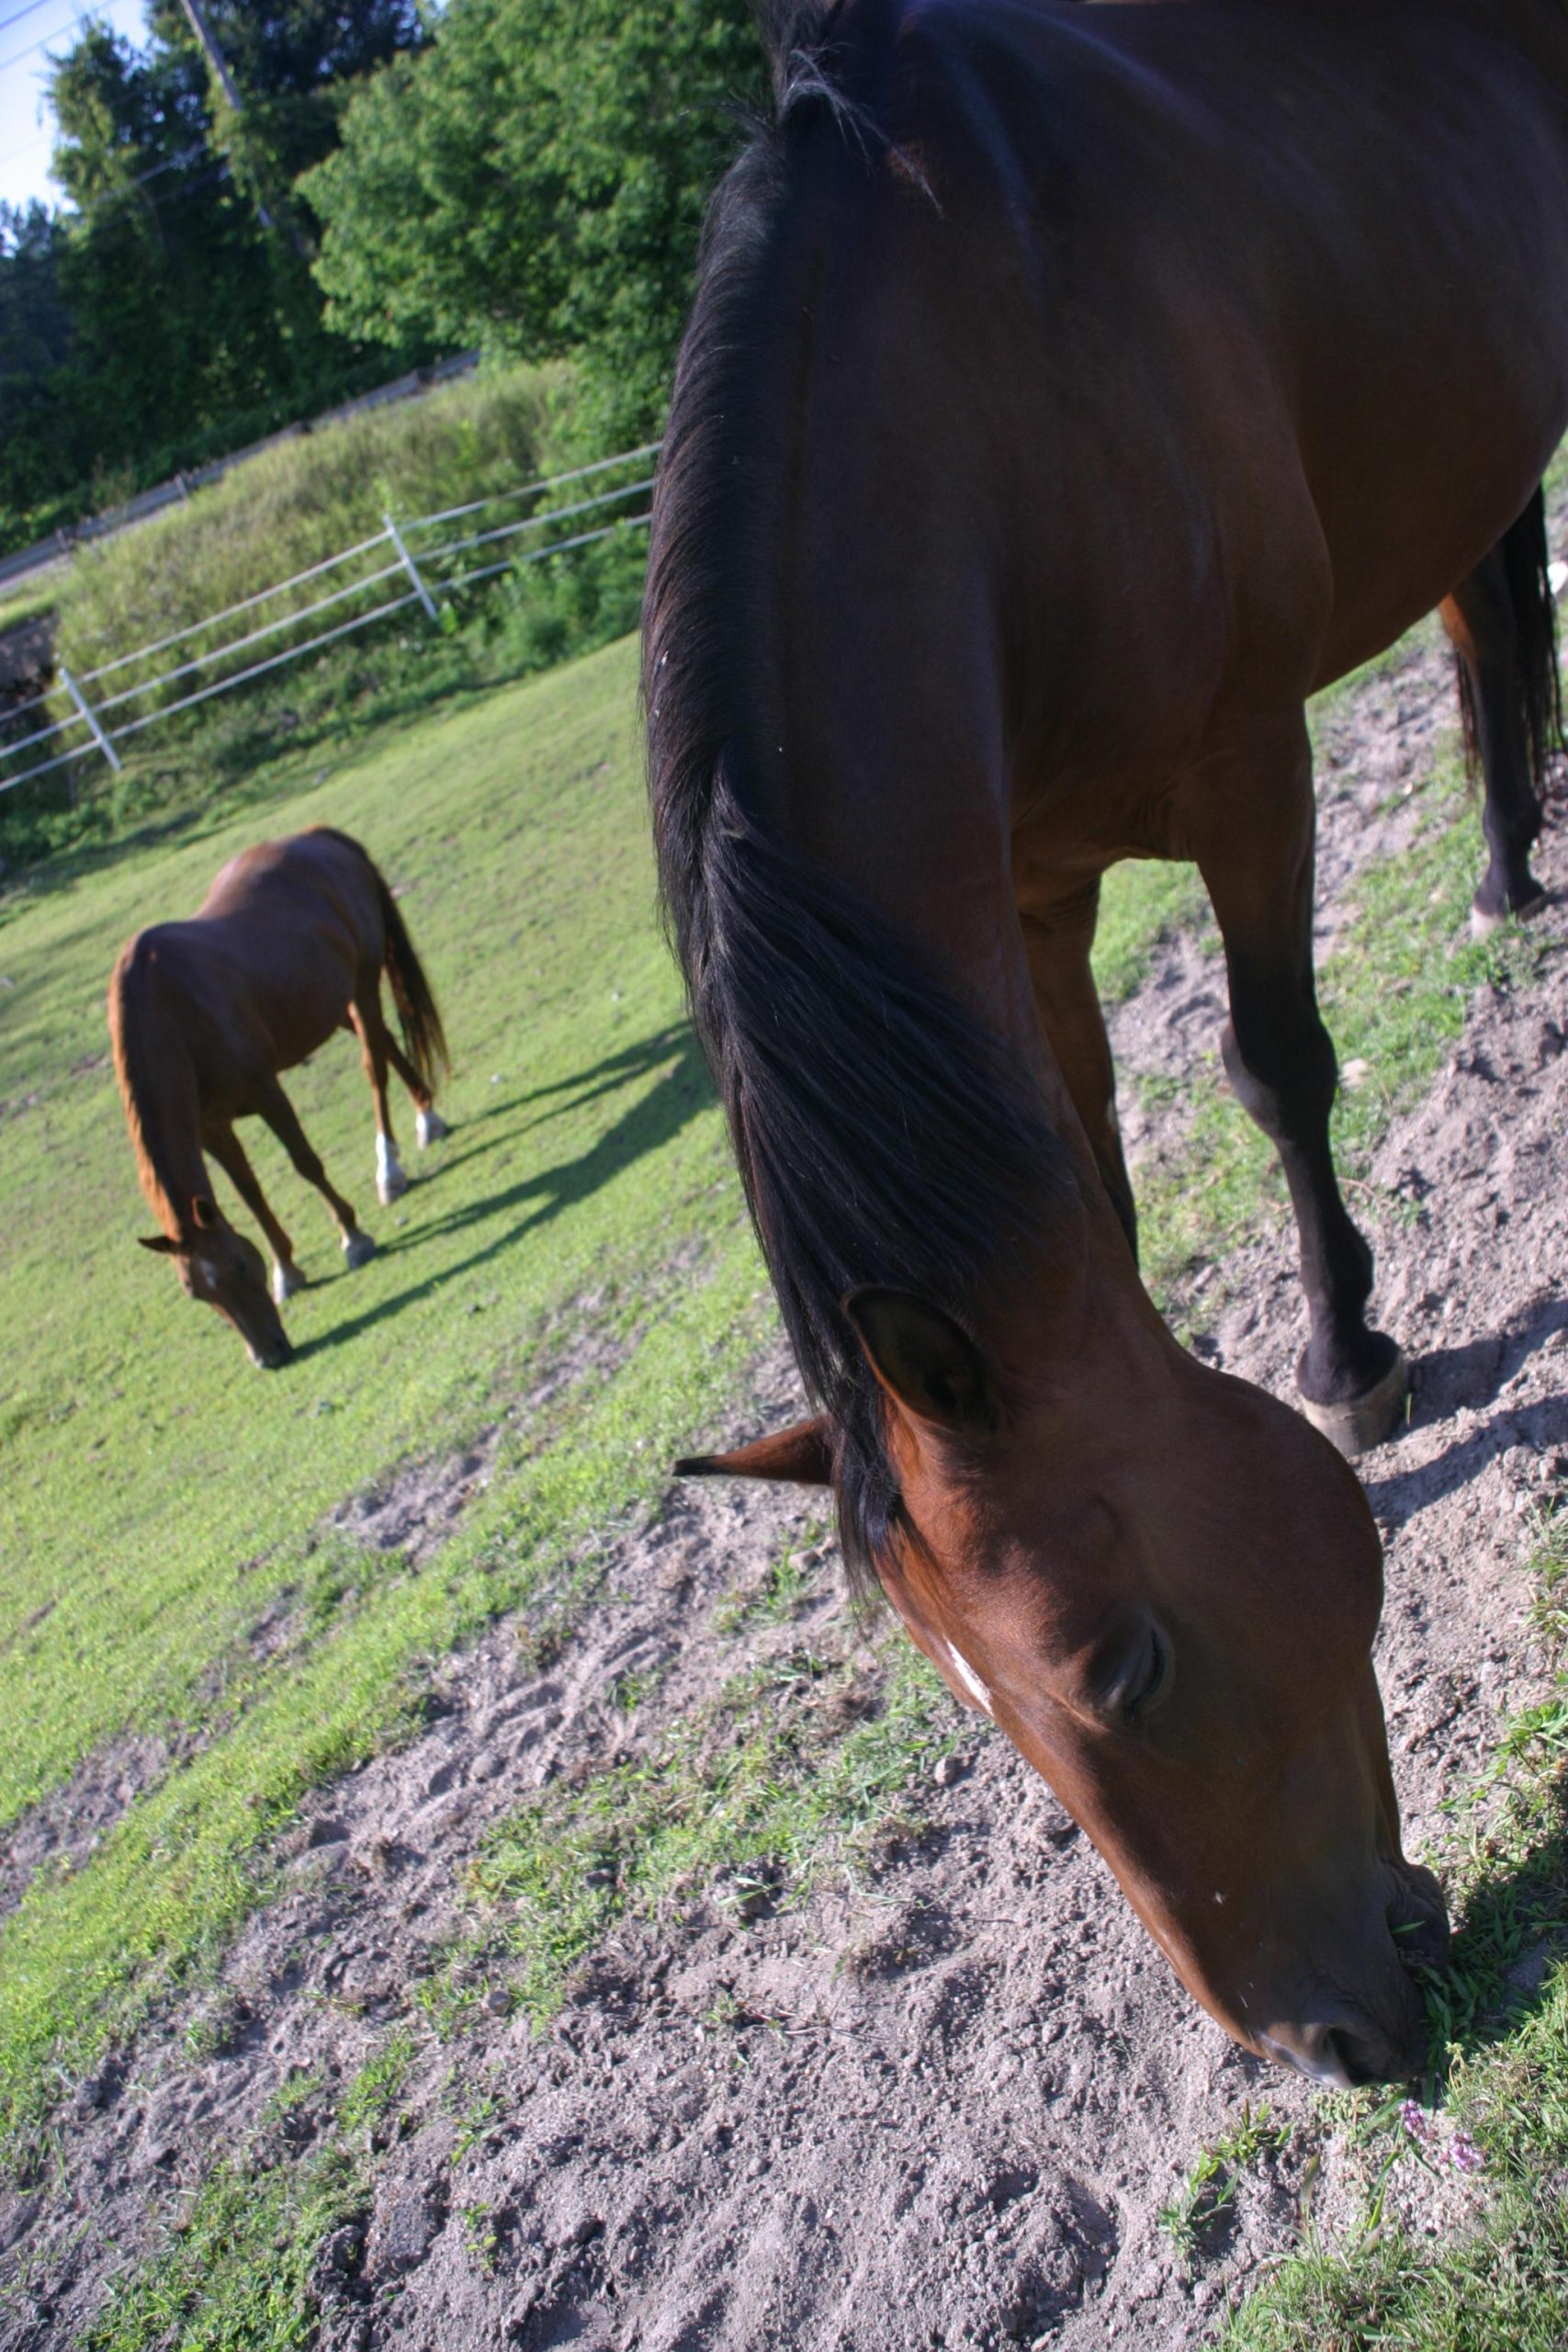 Horses (user submitted)